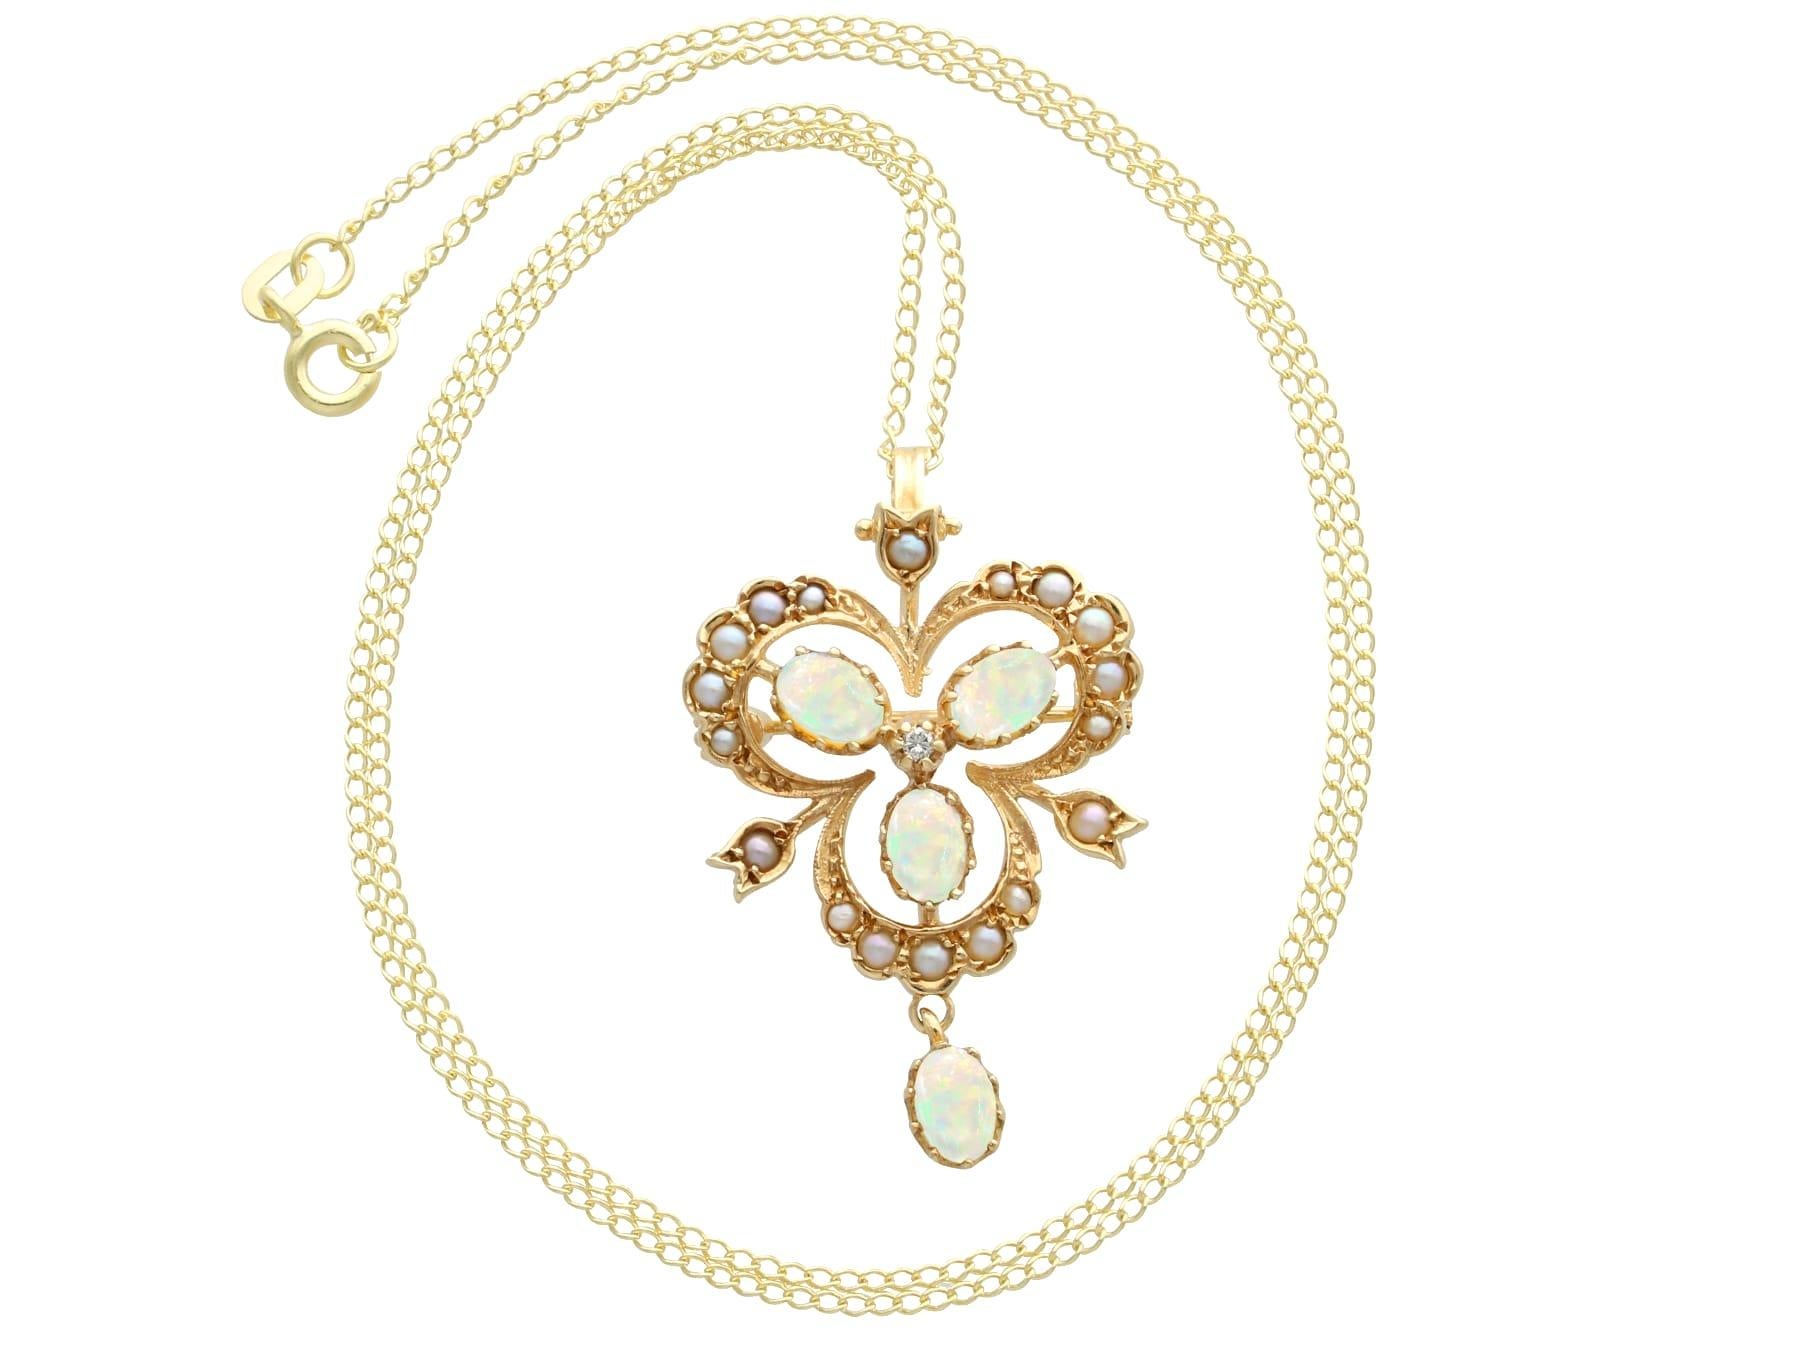 Cabochon Victorian Style 1.60Ct Opal Pearl and Diamond 9K Yellow Gold Pendant/Brooch For Sale